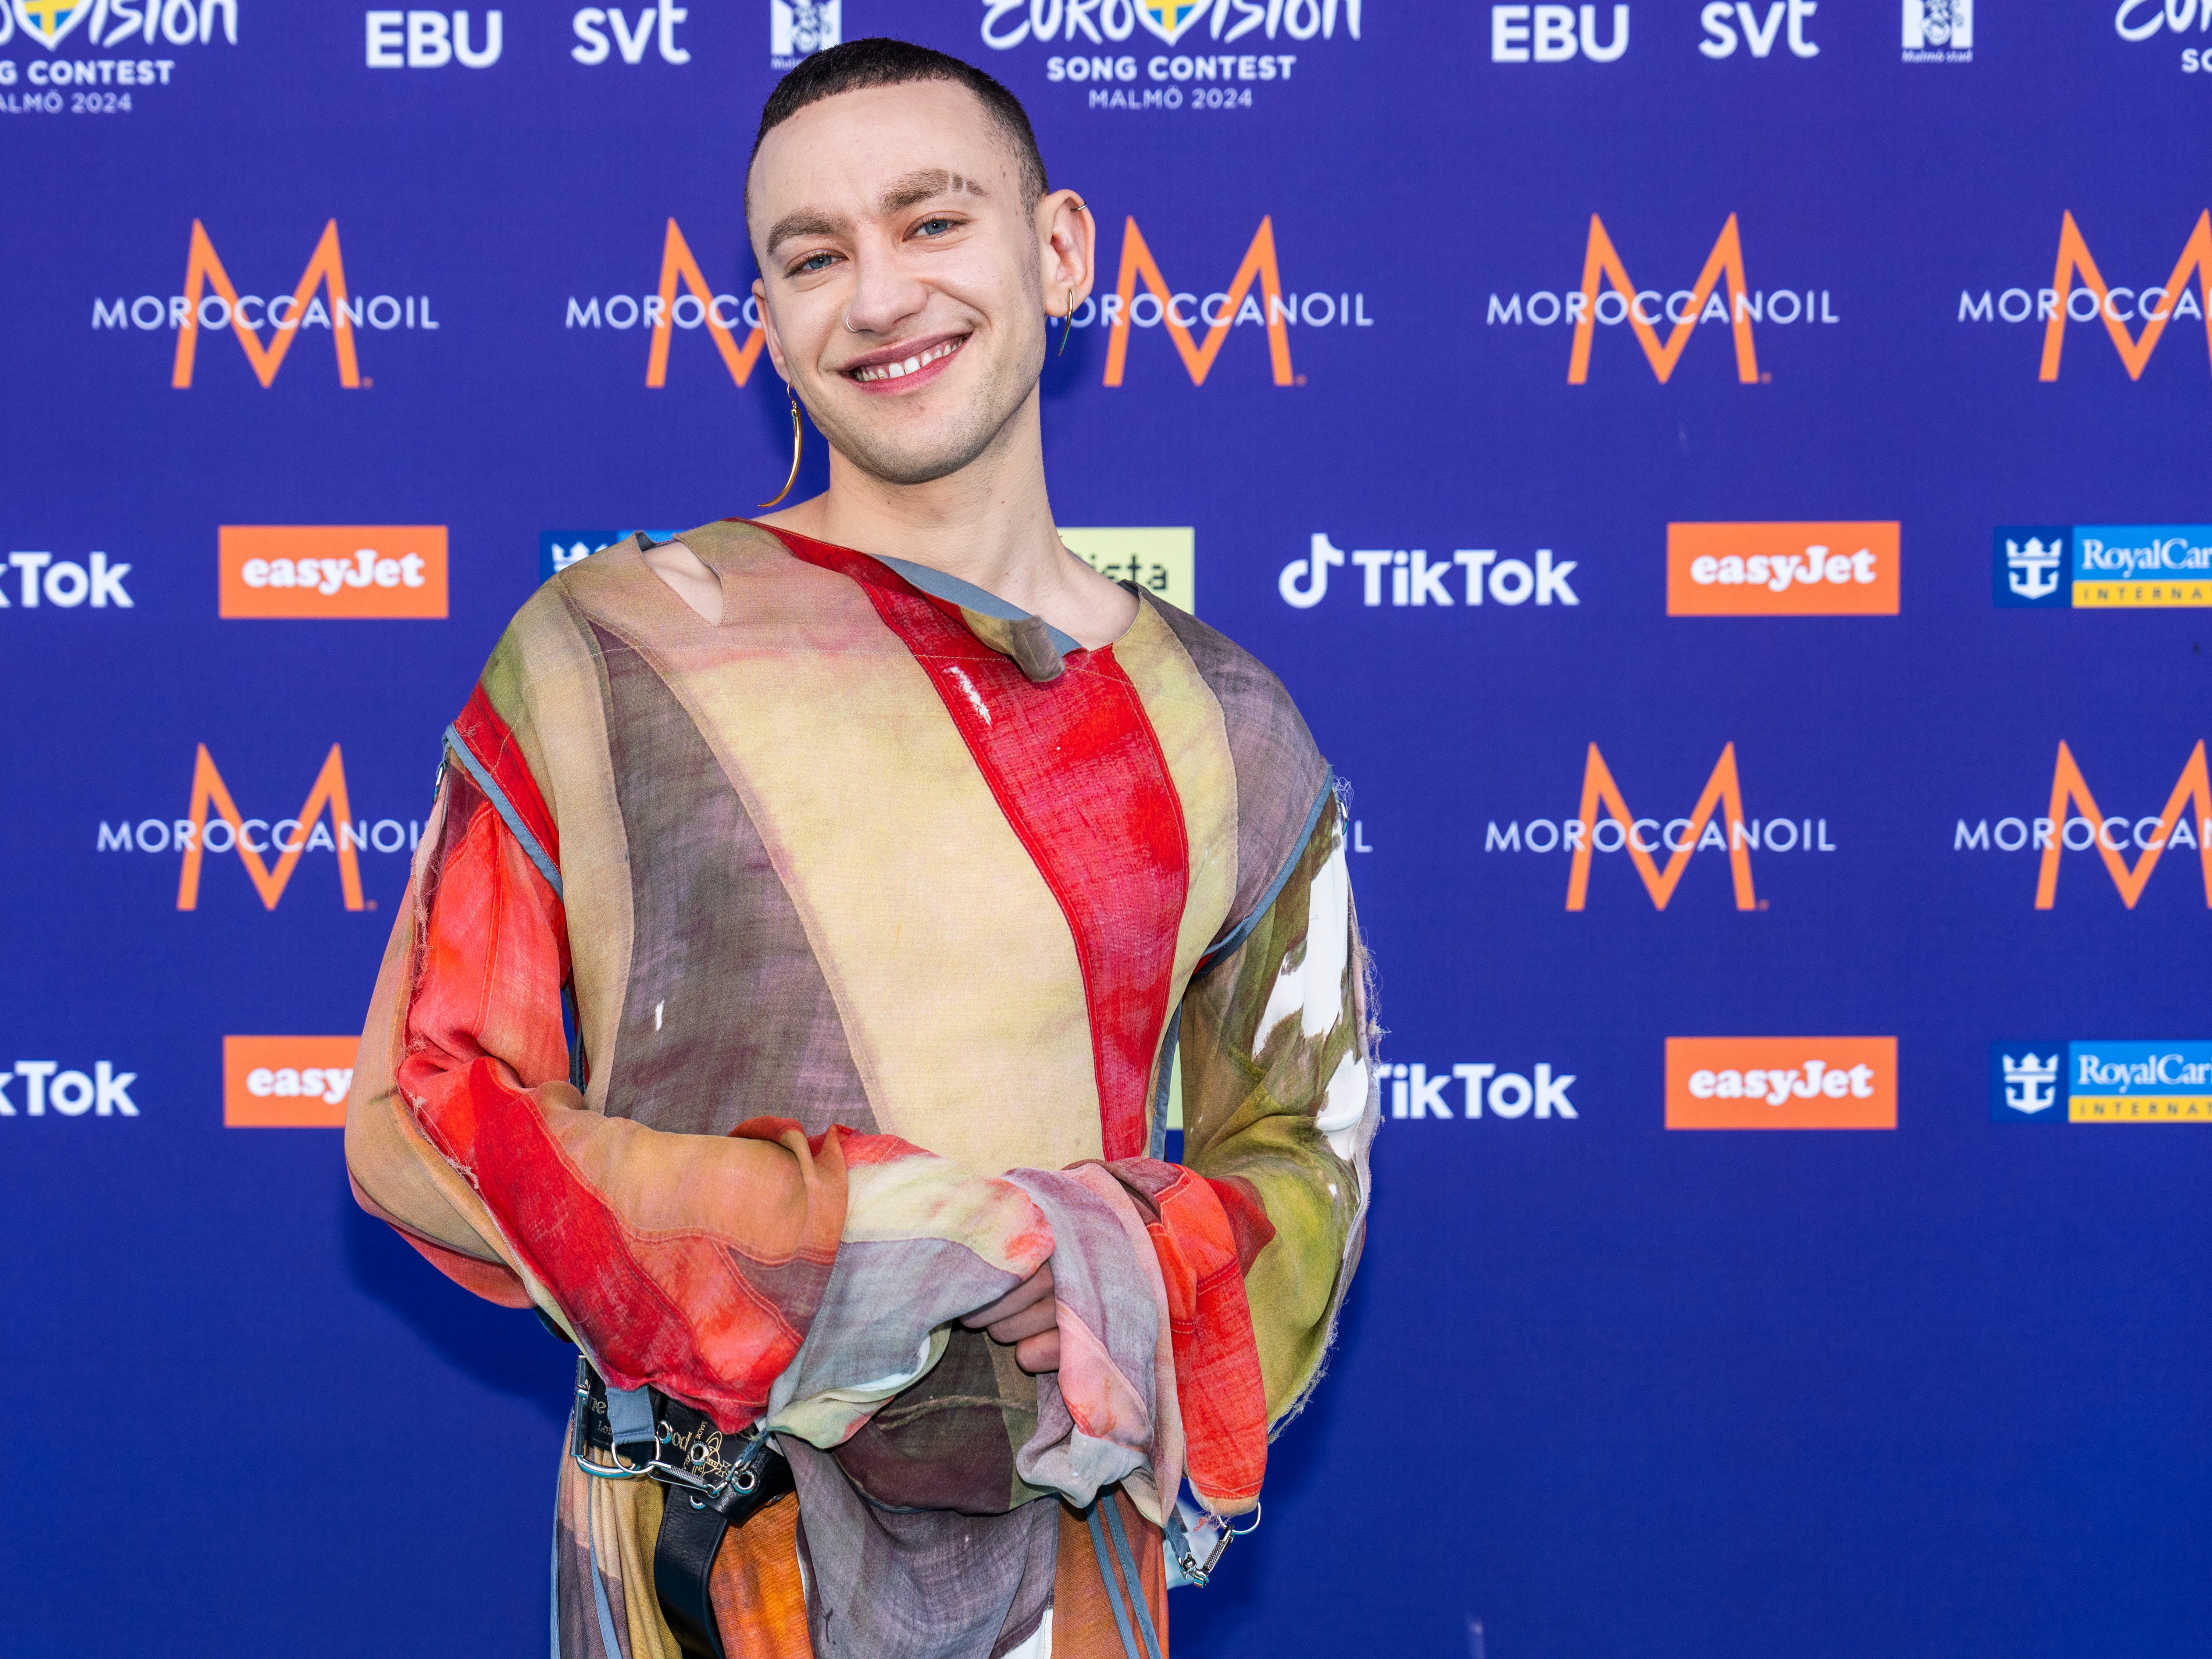 Olly Alexander was criticised for his response to calls for an Israel boycott